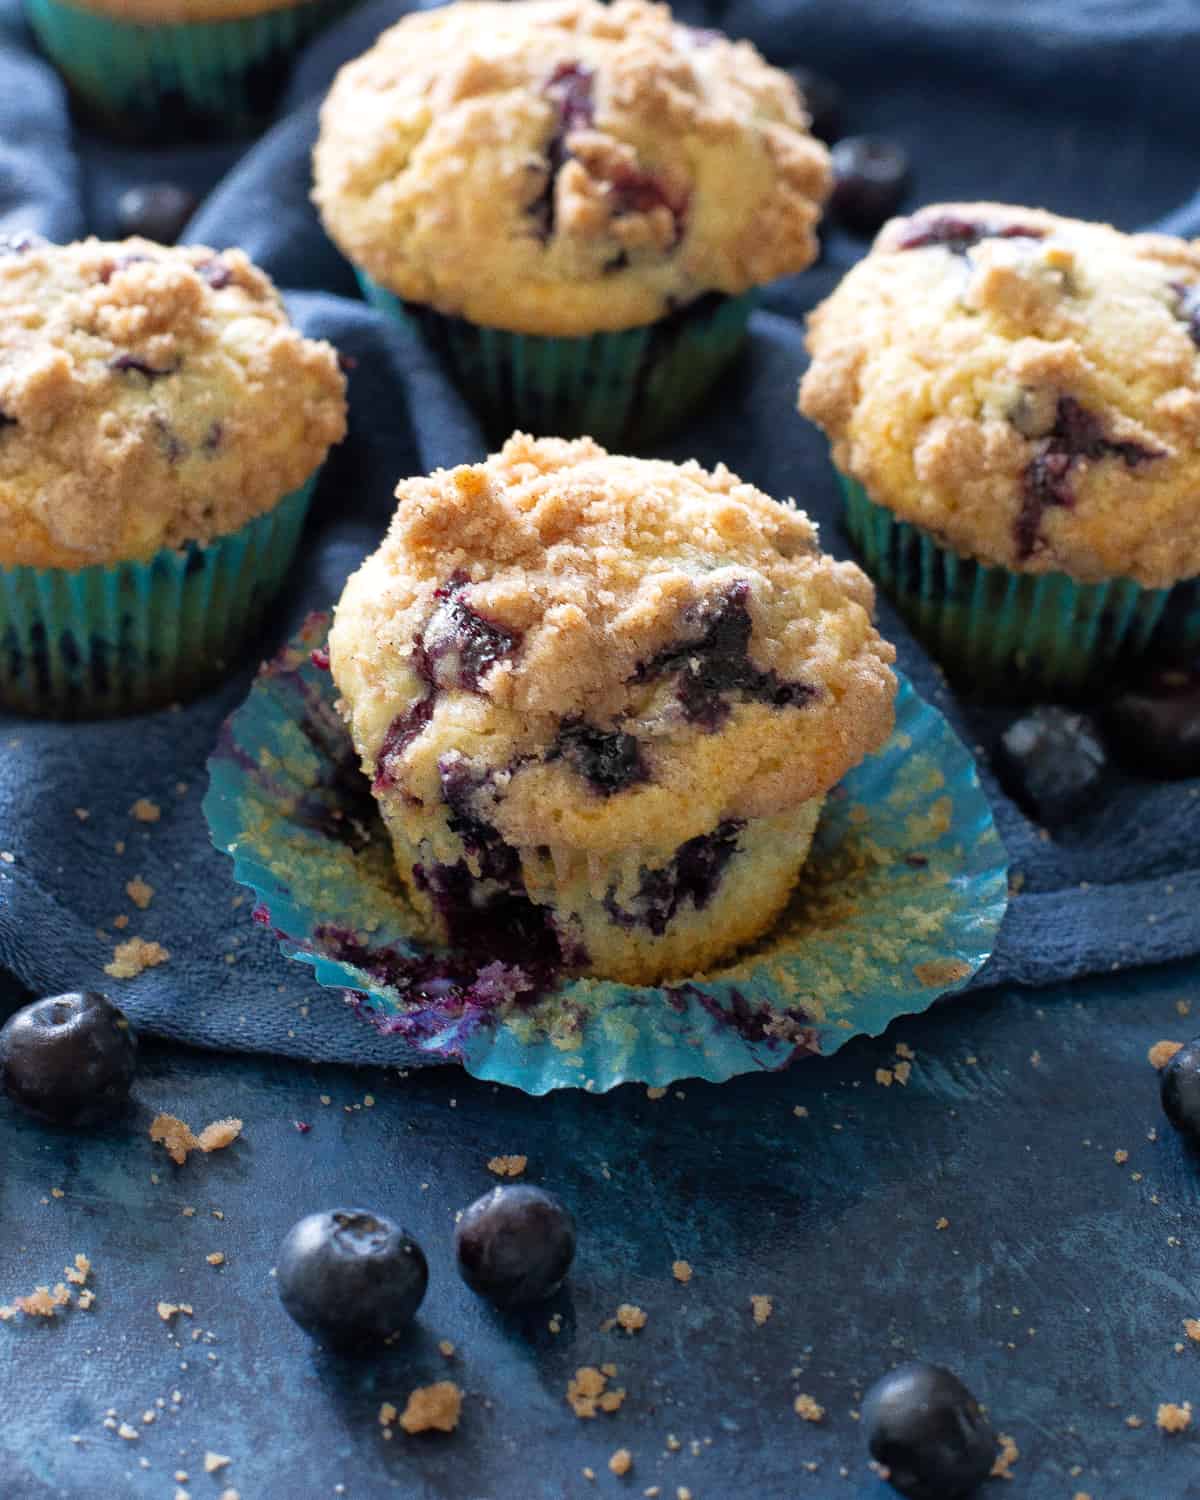 https://www.the-girl-who-ate-everything.com/wp-content/uploads/2011/06/blueberry-streusel-muffins-03.jpg